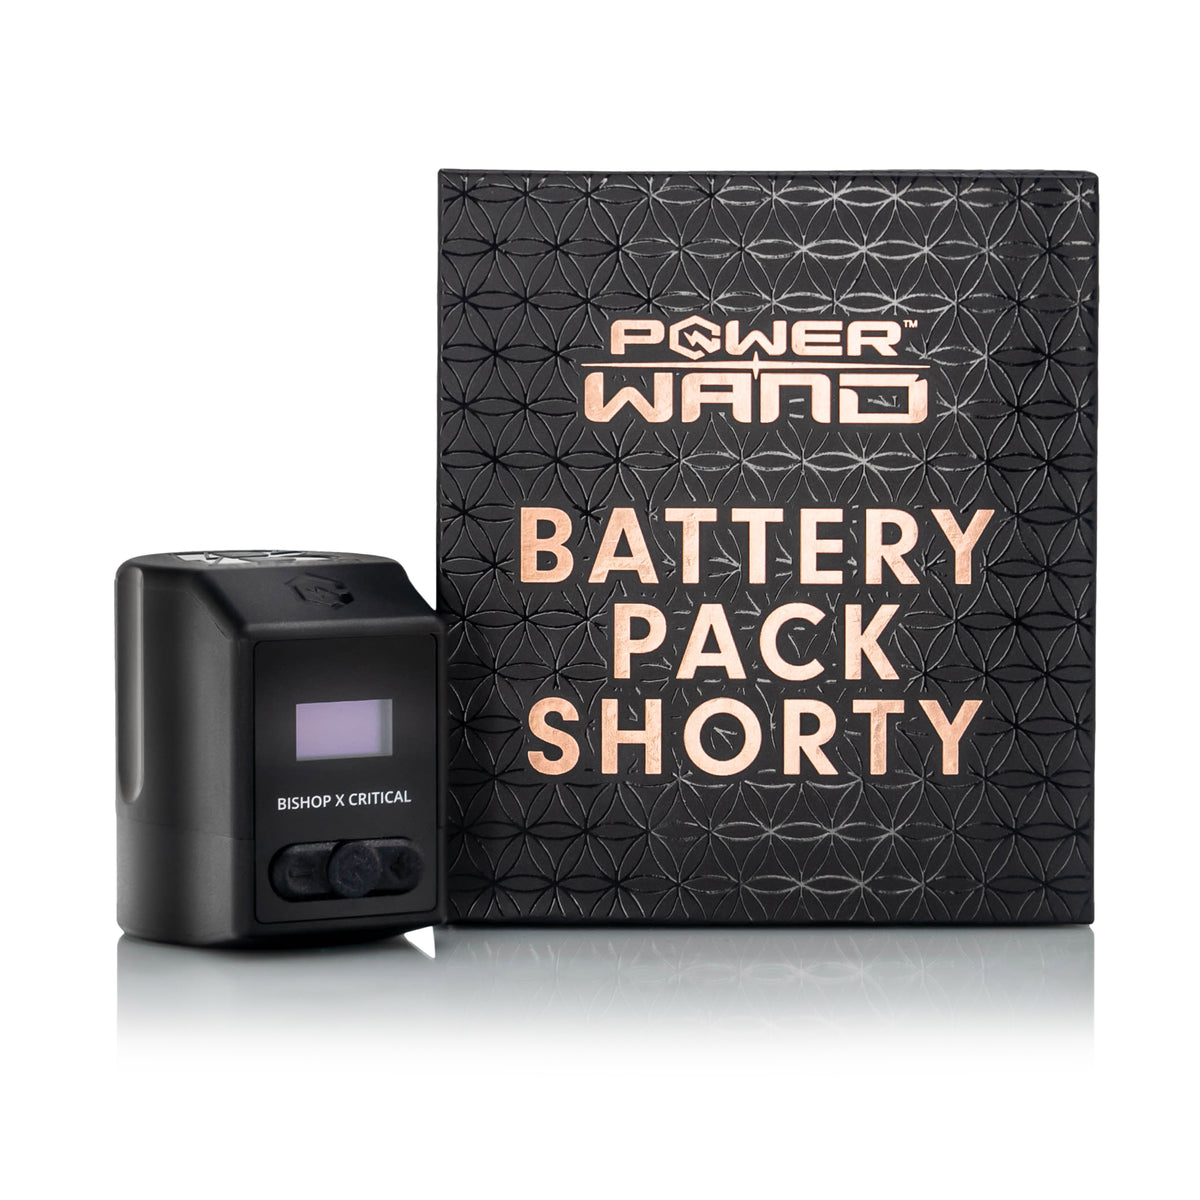 Bishop x Critical Power Wand Battery Pack-Shorty